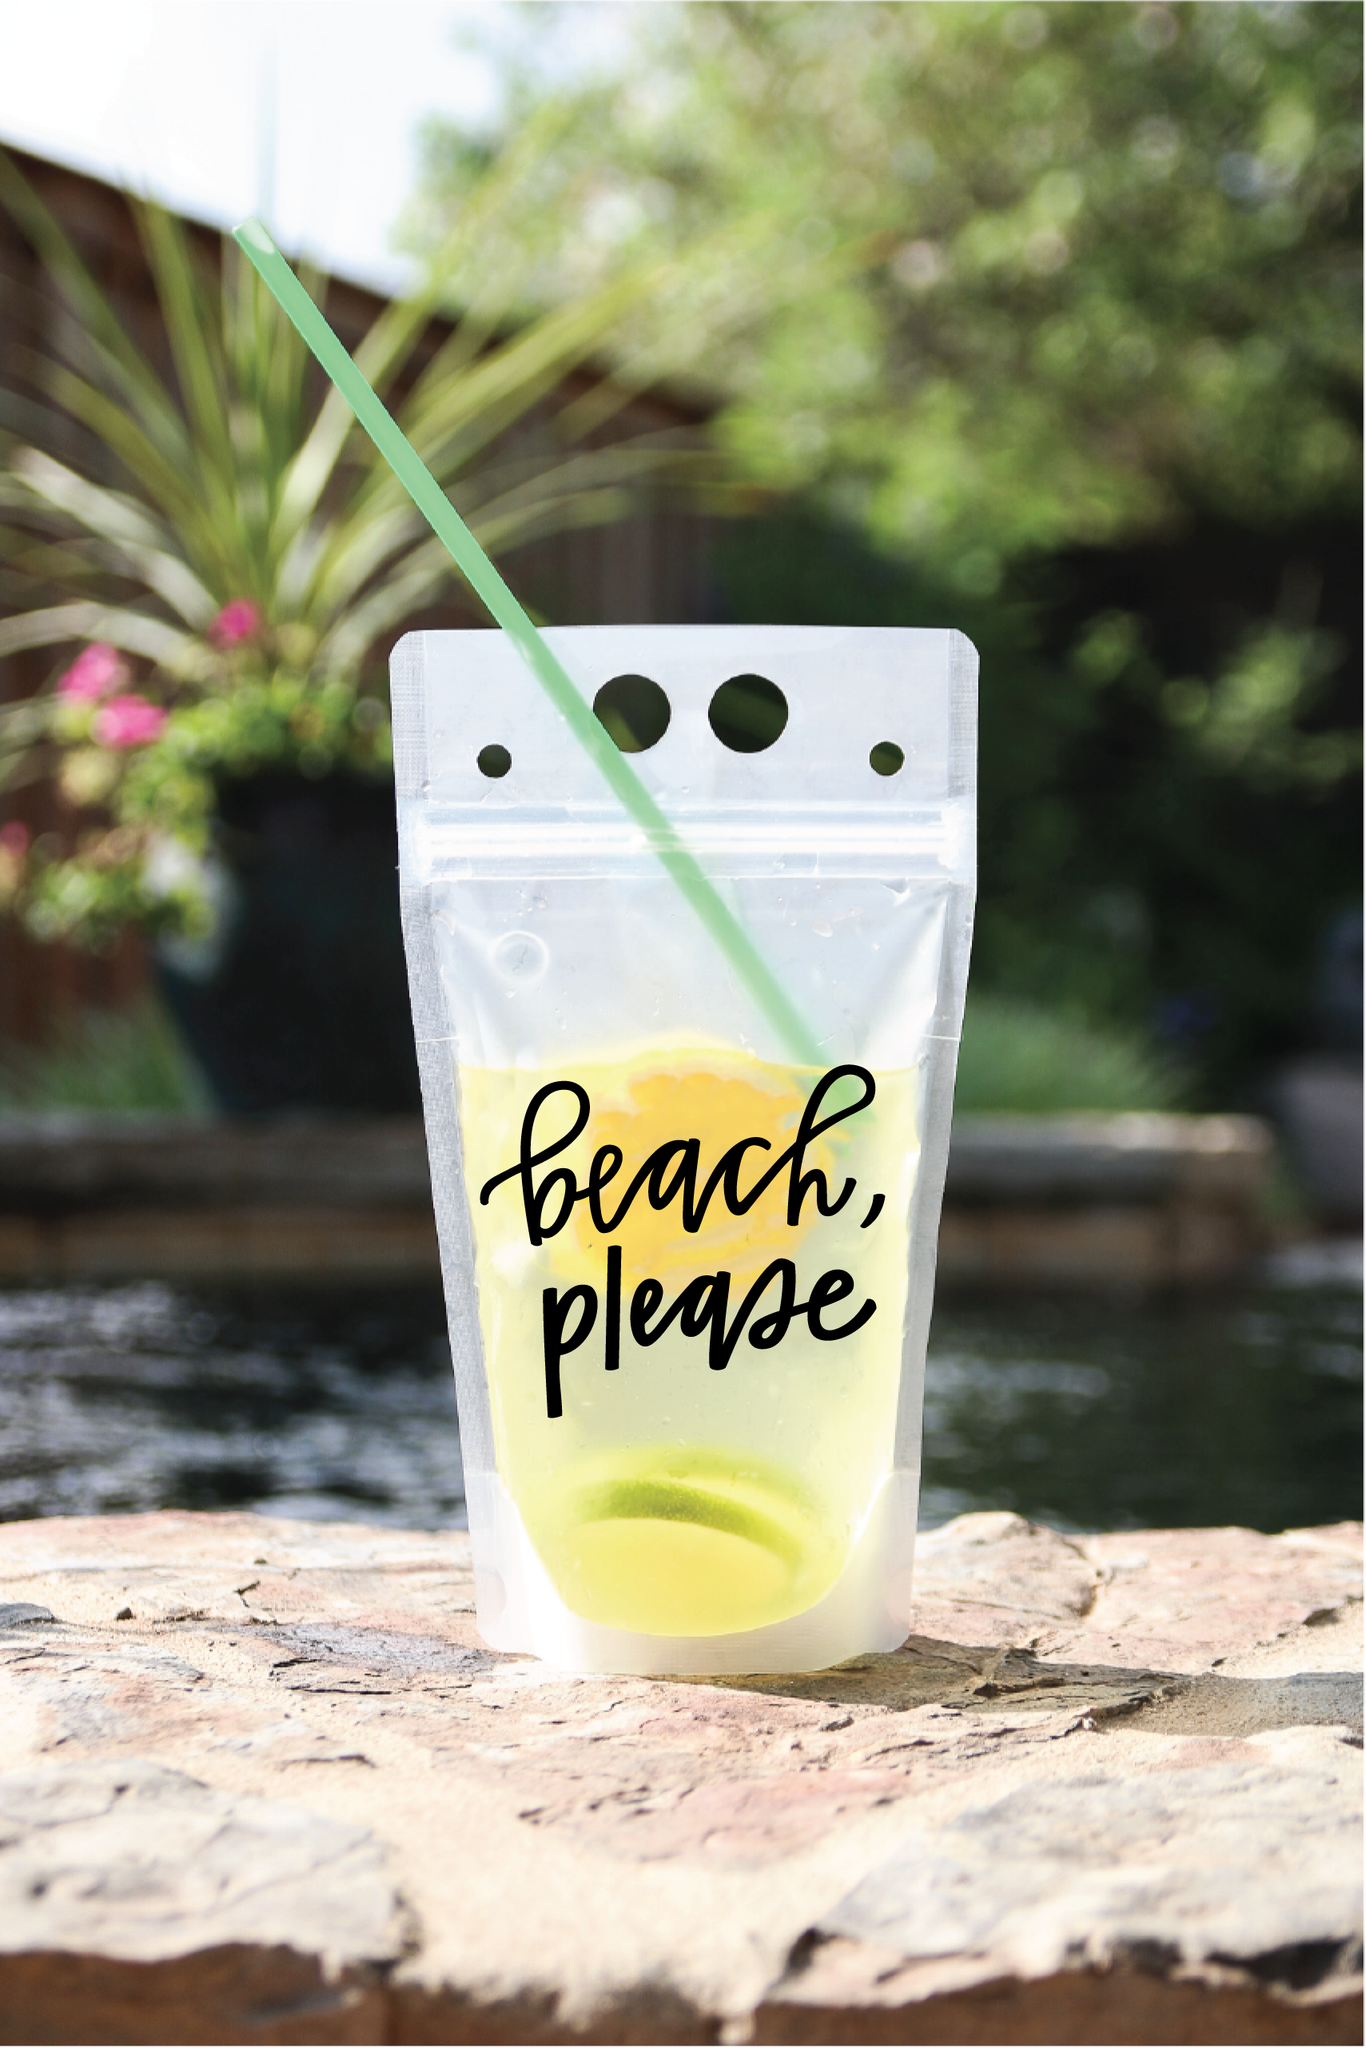 Drink Pouch Party - Beach, Please Drink Pouch